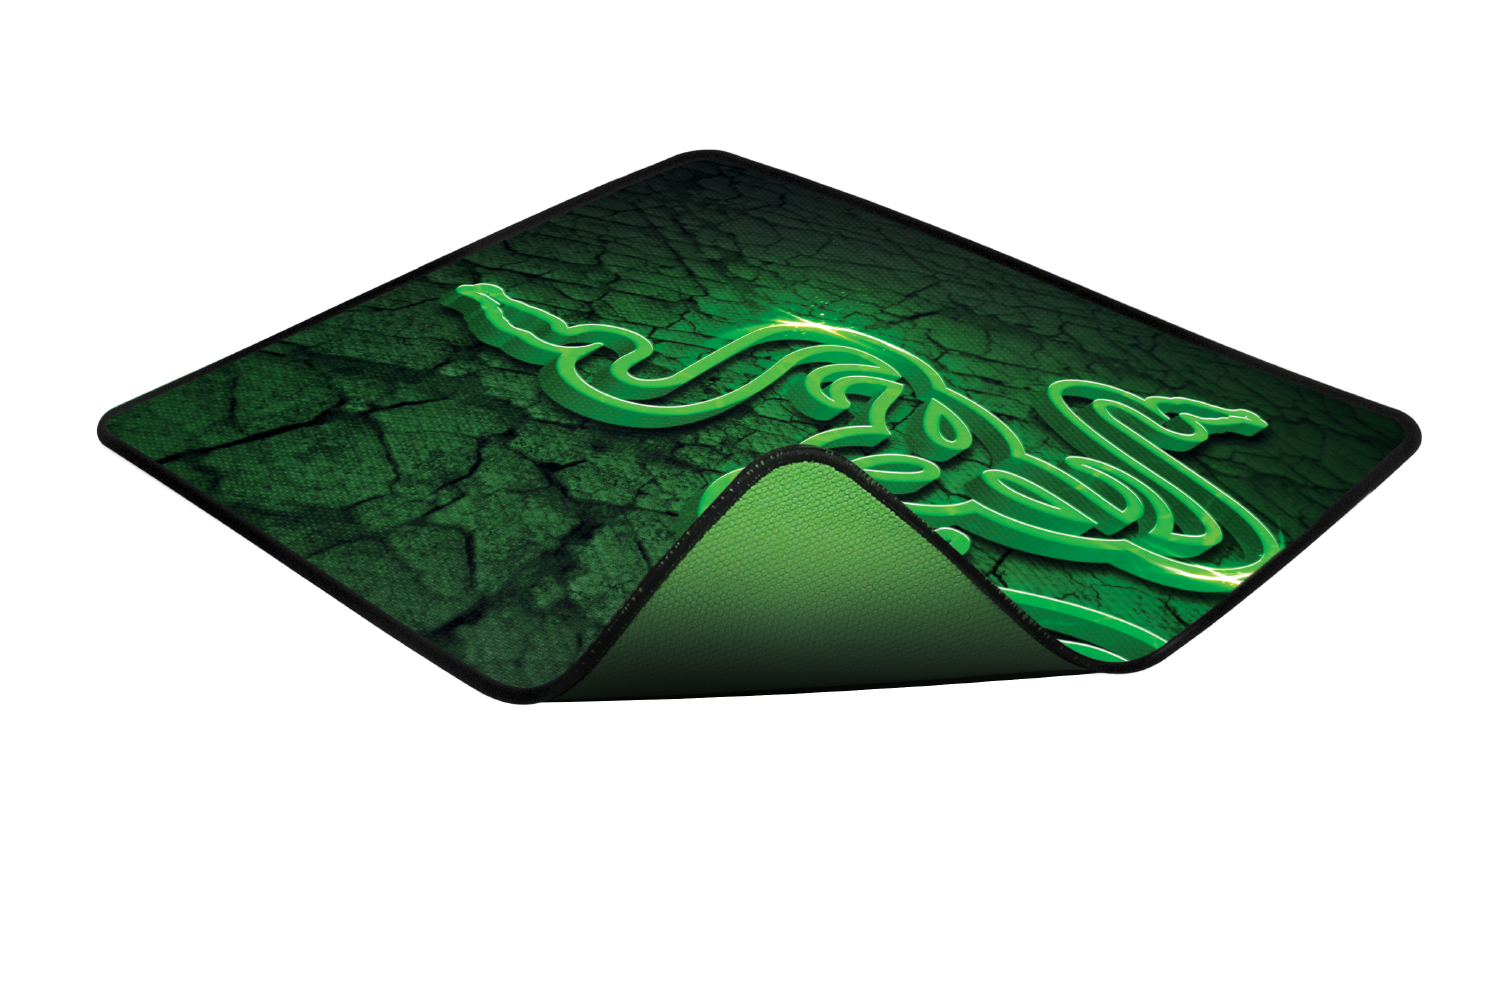 Razer Goliathus Control Fissure Edition Large Gaming Mouse Pad / Mat 444x355mm